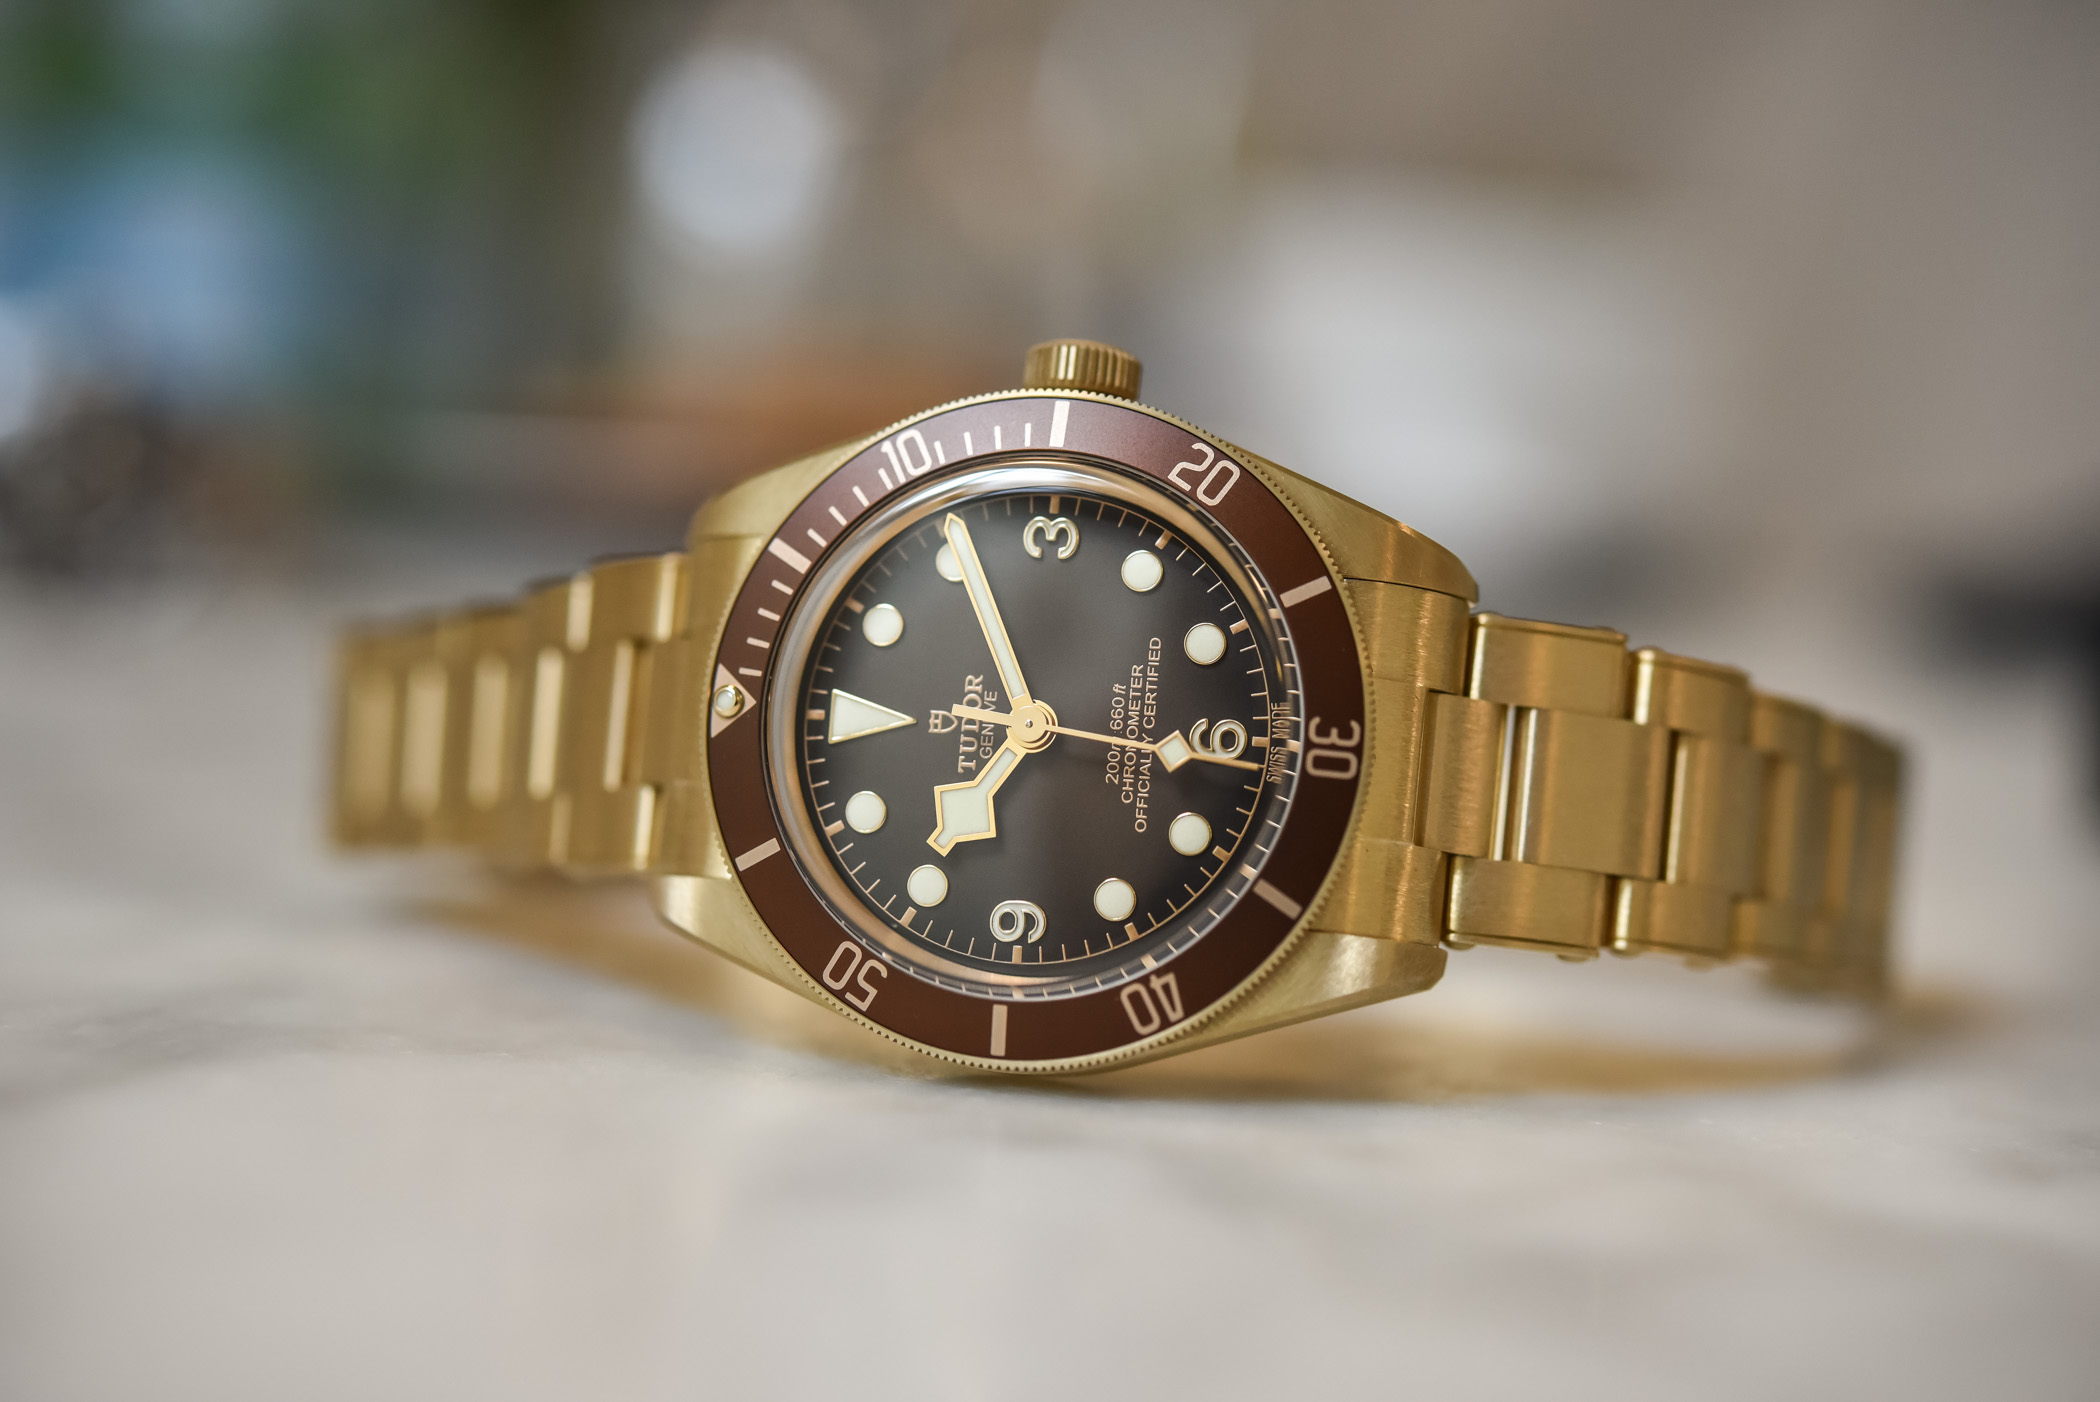 Tudor Black Bay Fifty-Eight Bronze M79012M - Hands-On Review, Price